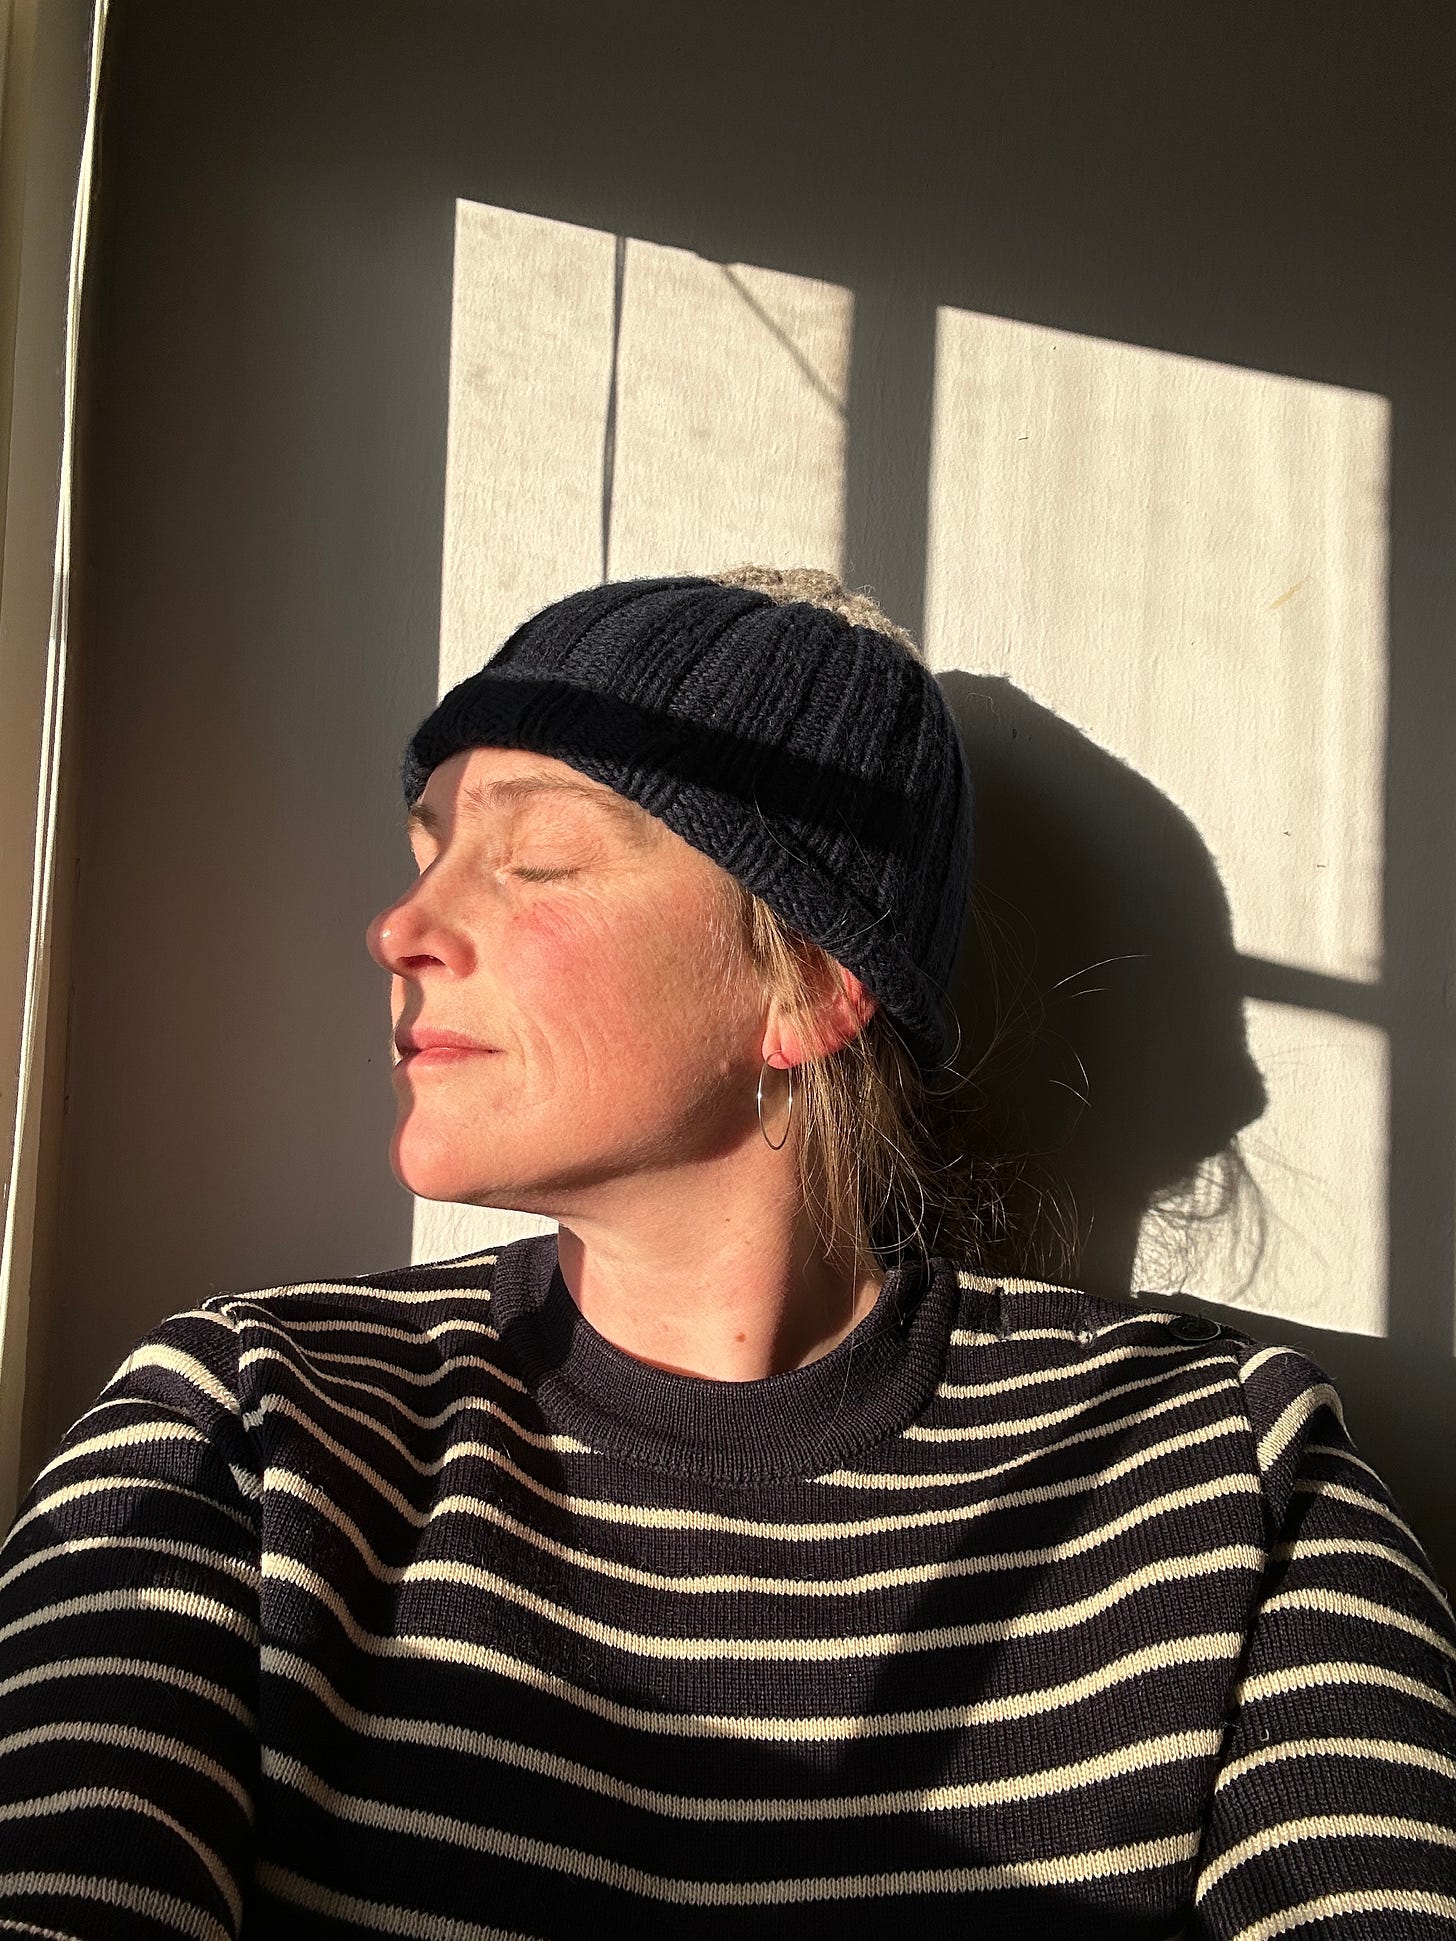 A photo of the artist sitting in sunlight near a window, with her eyes closed